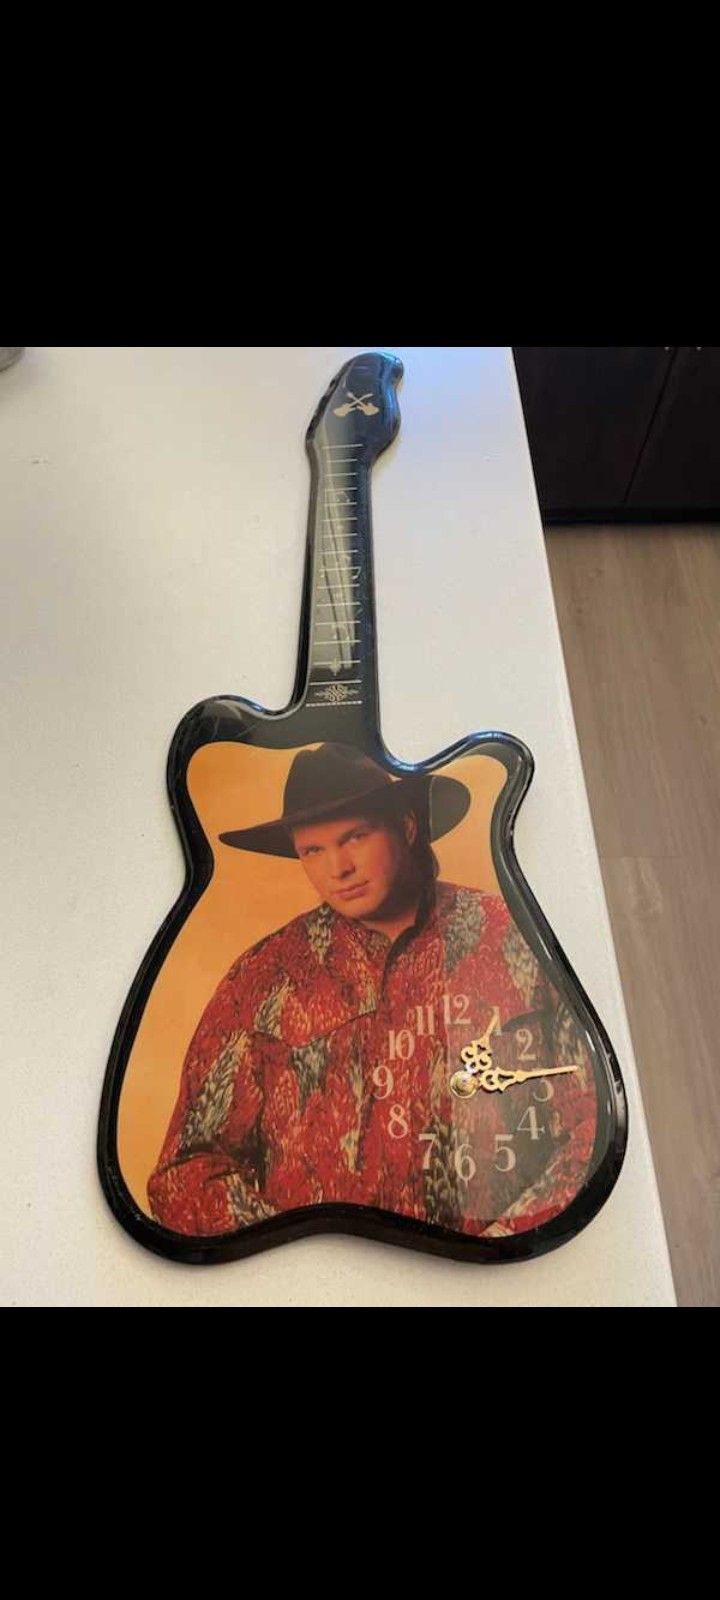 Antique Garth Brooks guitar clock!! Won't Find This Every Day! 